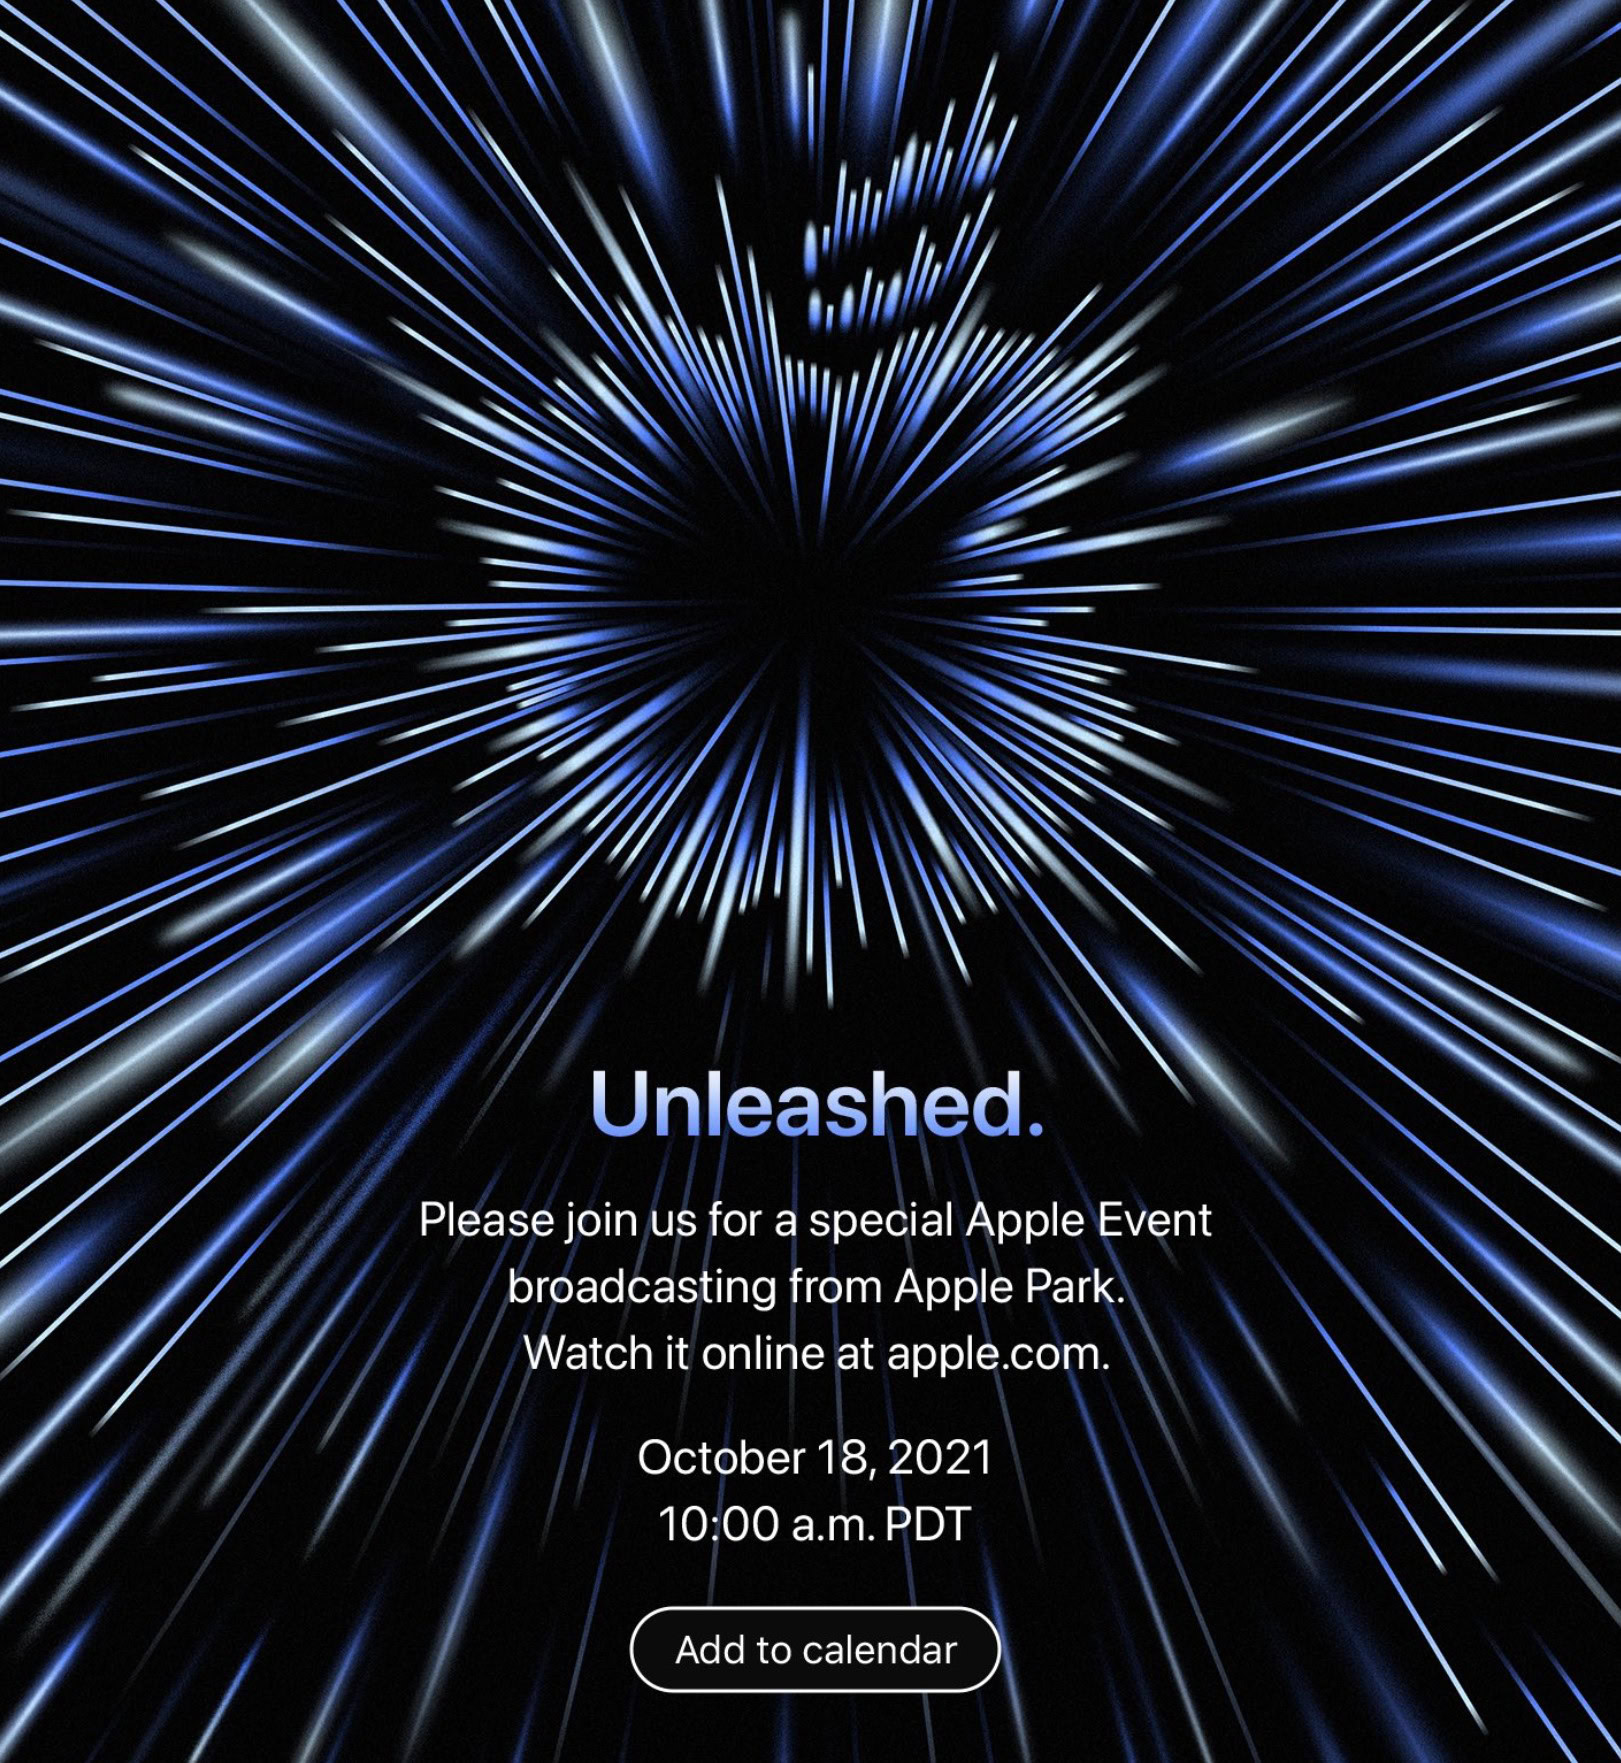 Apple Unleashed October 2021 event